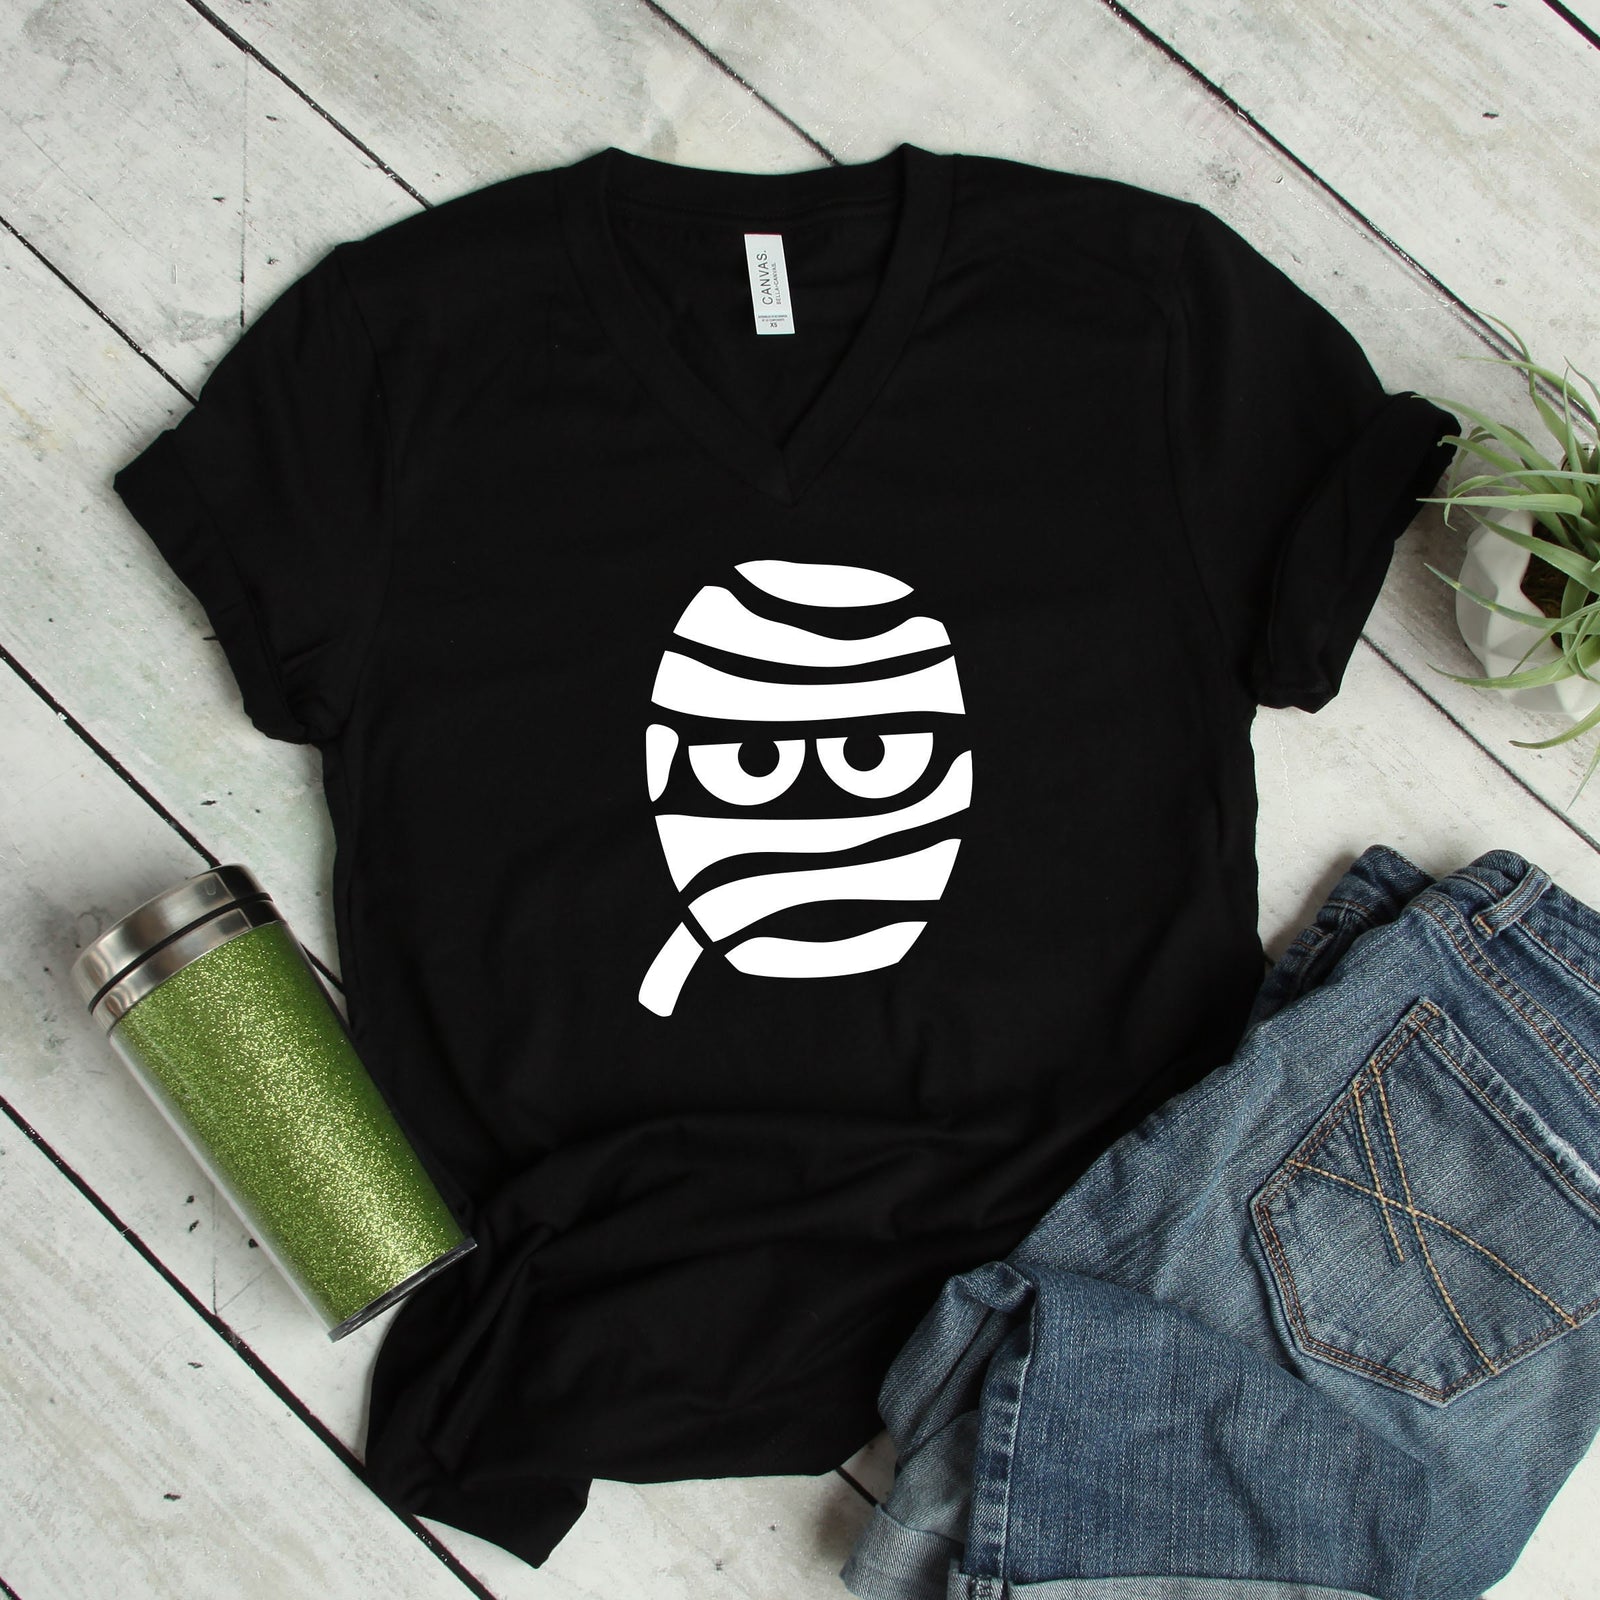 Mummy Adult T Shirt - Halloween - Funny T Shirts - Cute - Not Scary Costume